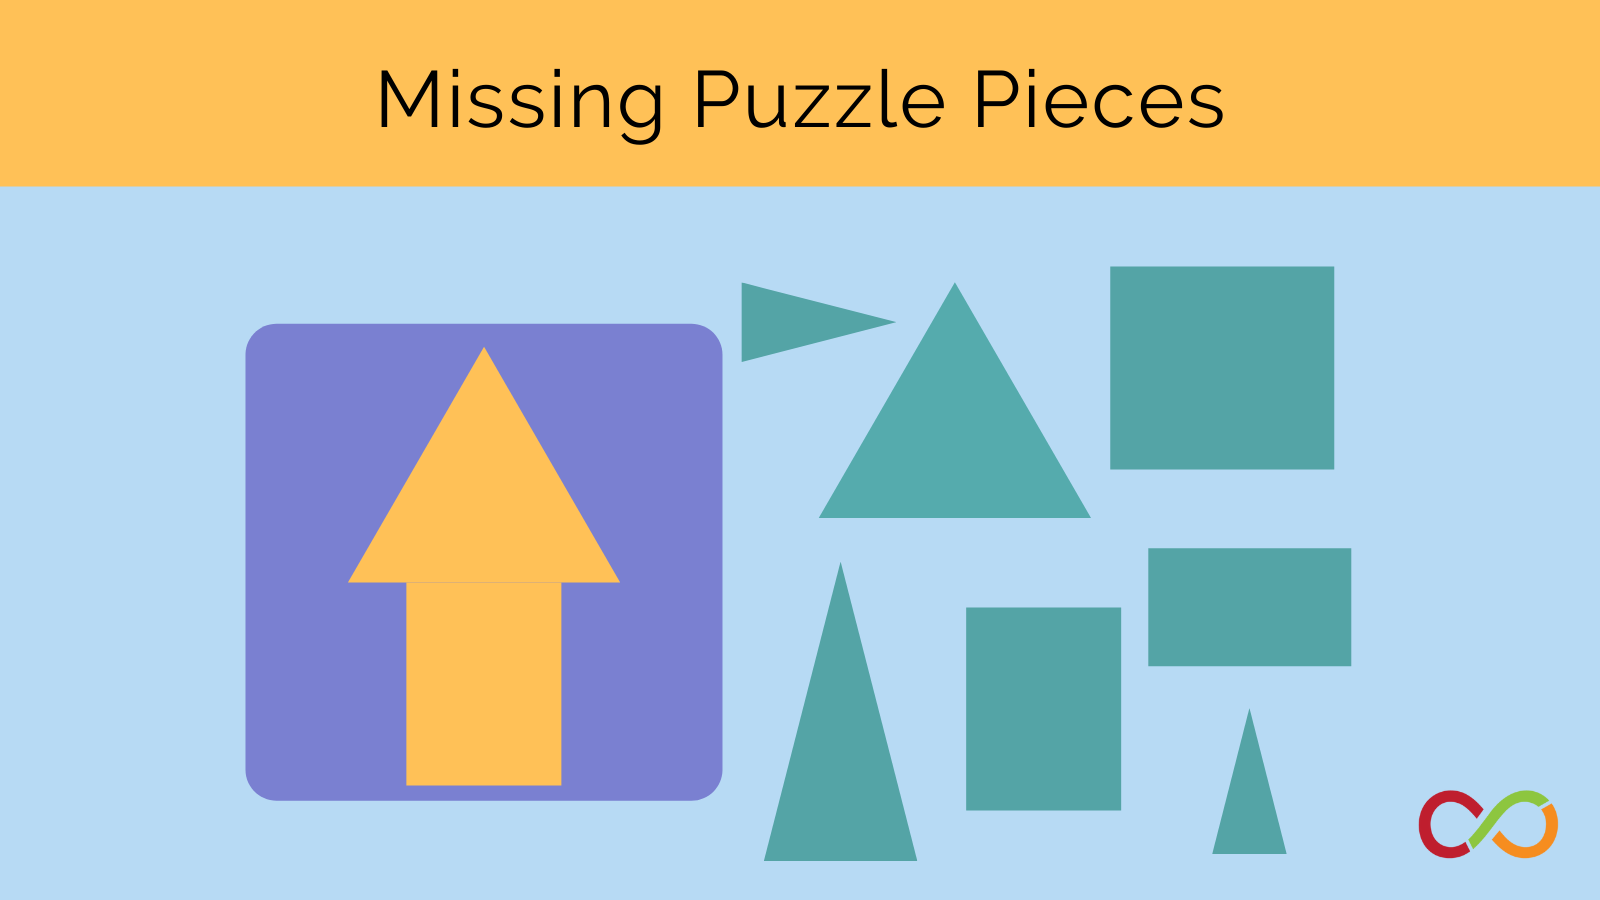 An image linking to the Missing Puzzle Pieces lesson